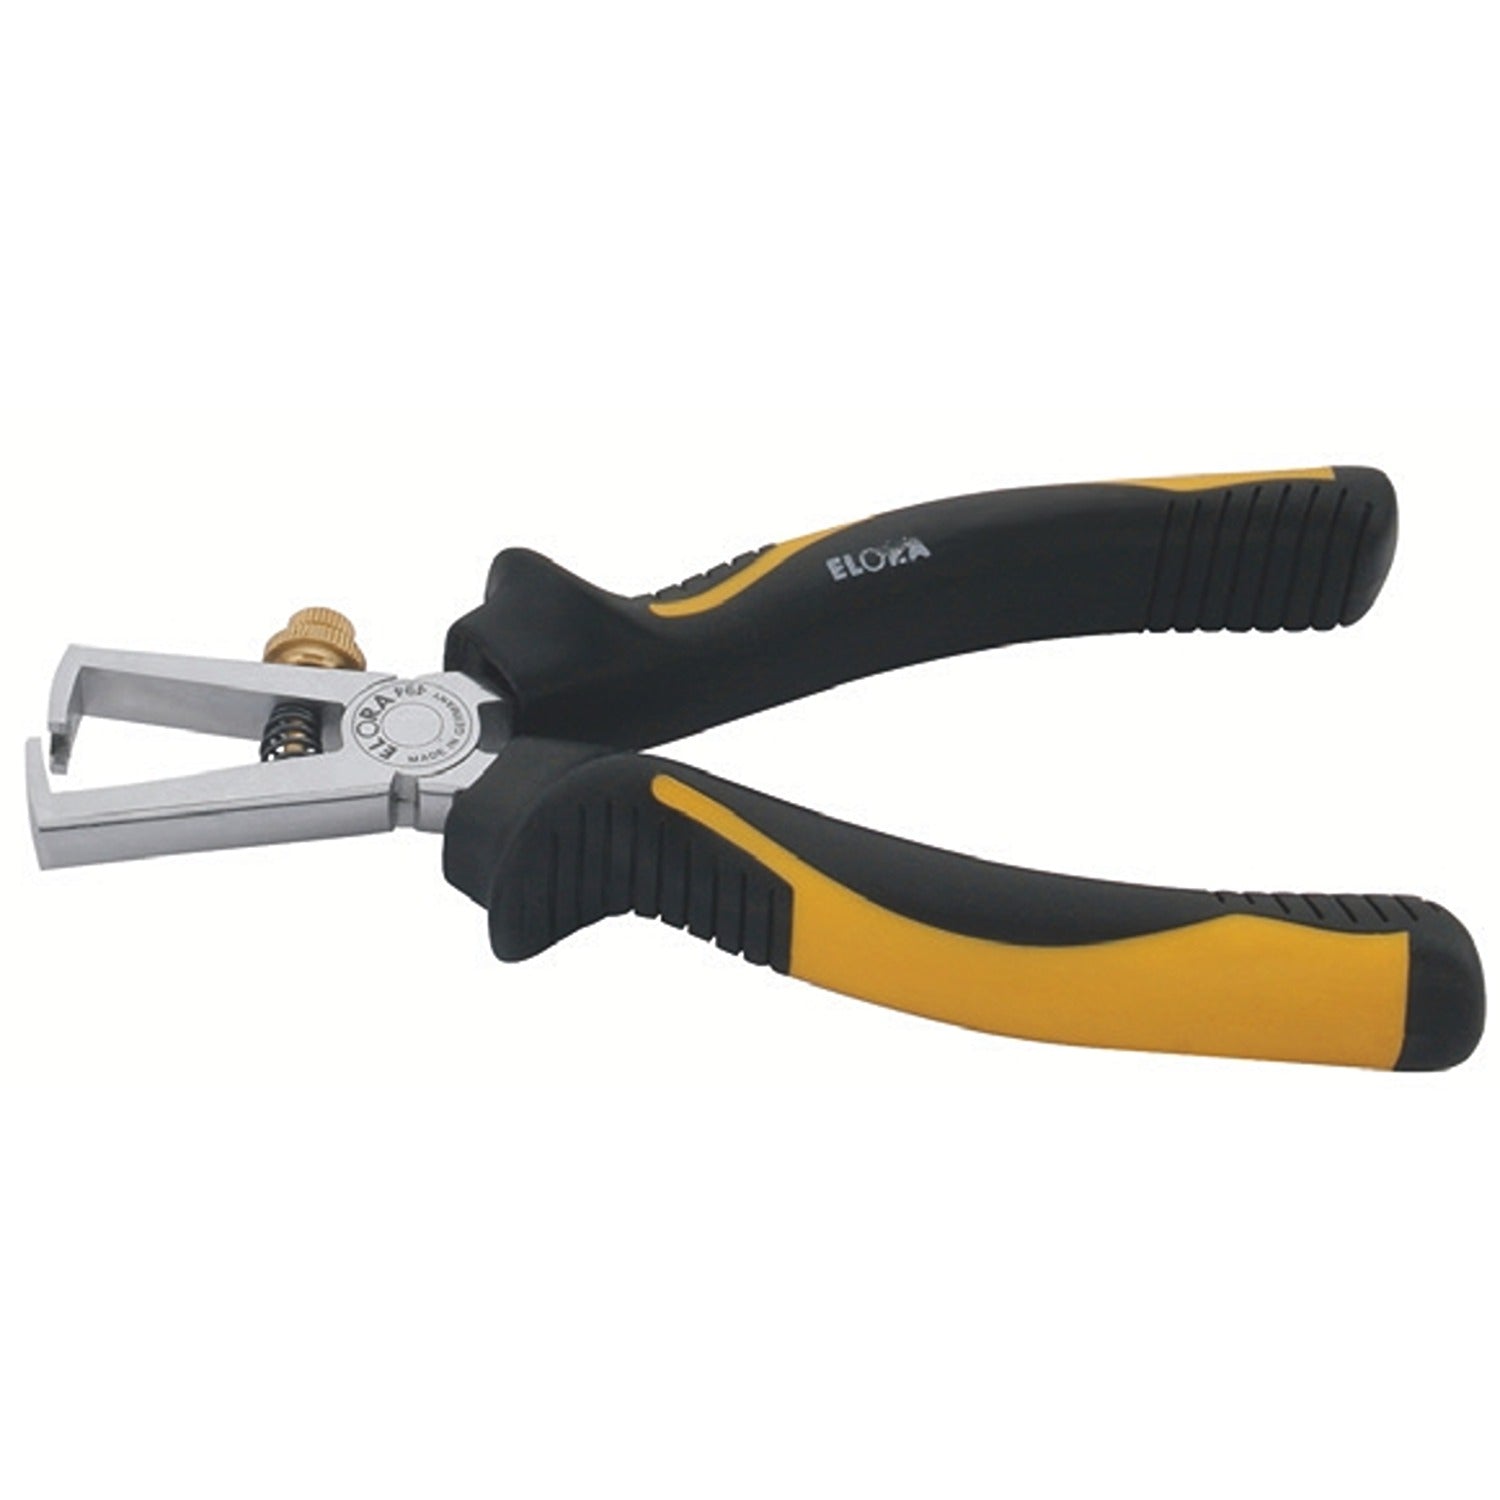 ELORA 494 BI Wire Stripper With Restricted Opening (ELORA Tools) - Premium Wire Stripper from ELORA - Shop now at Yew Aik.